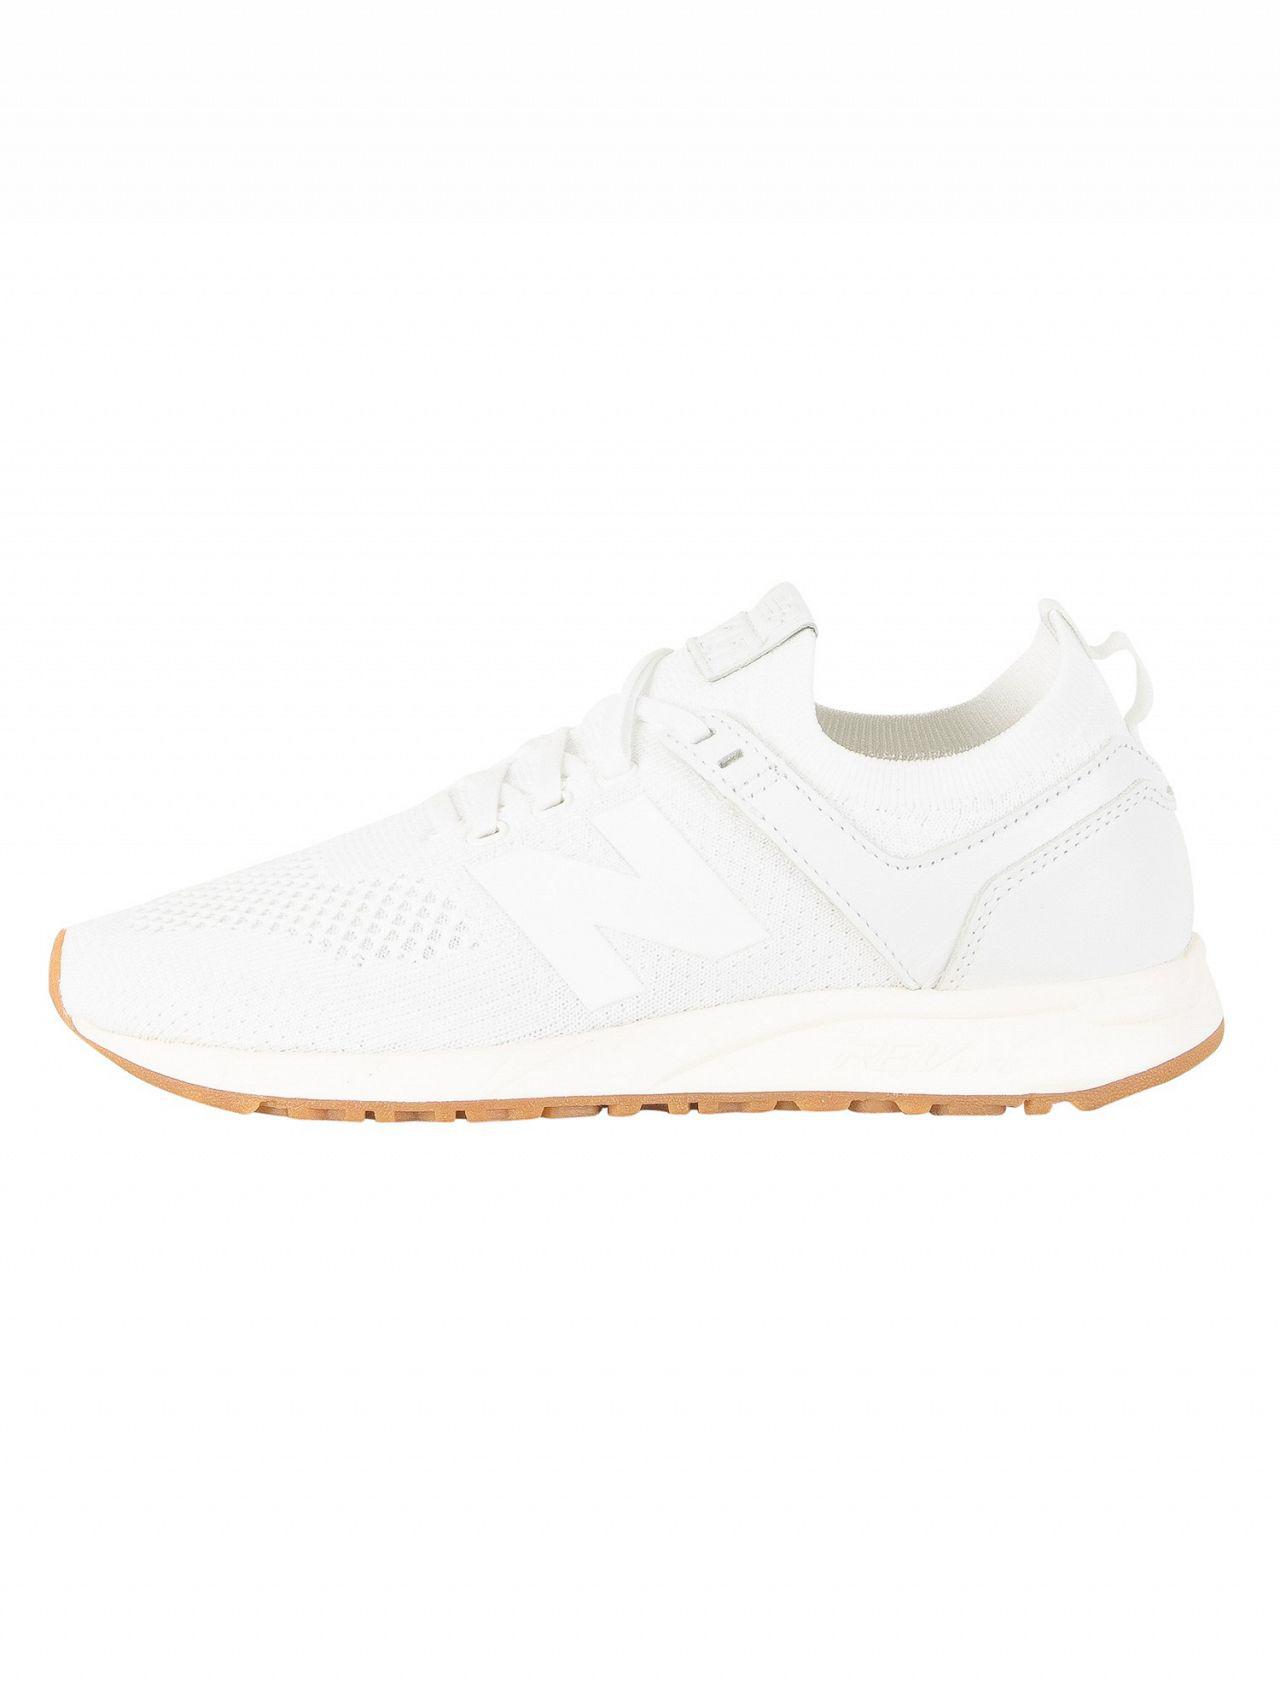 New Balance White/gum 247 Trainers for Men | Lyst Canada